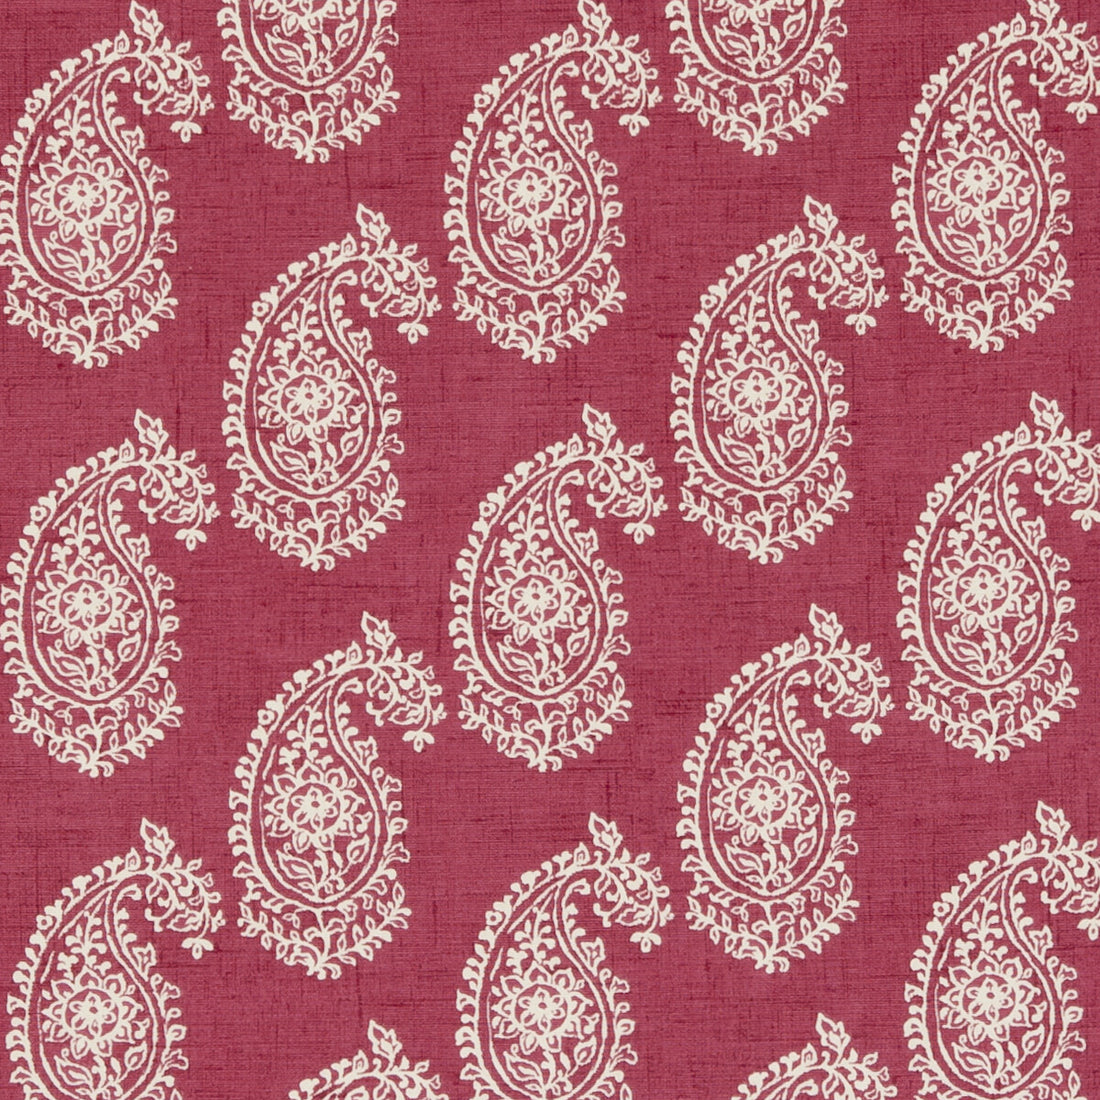 Harriet fabric in raspberry color - pattern F0623/04.CAC.0 - by Clarke And Clarke in the Genevieve By Studio G For C&amp;C collection